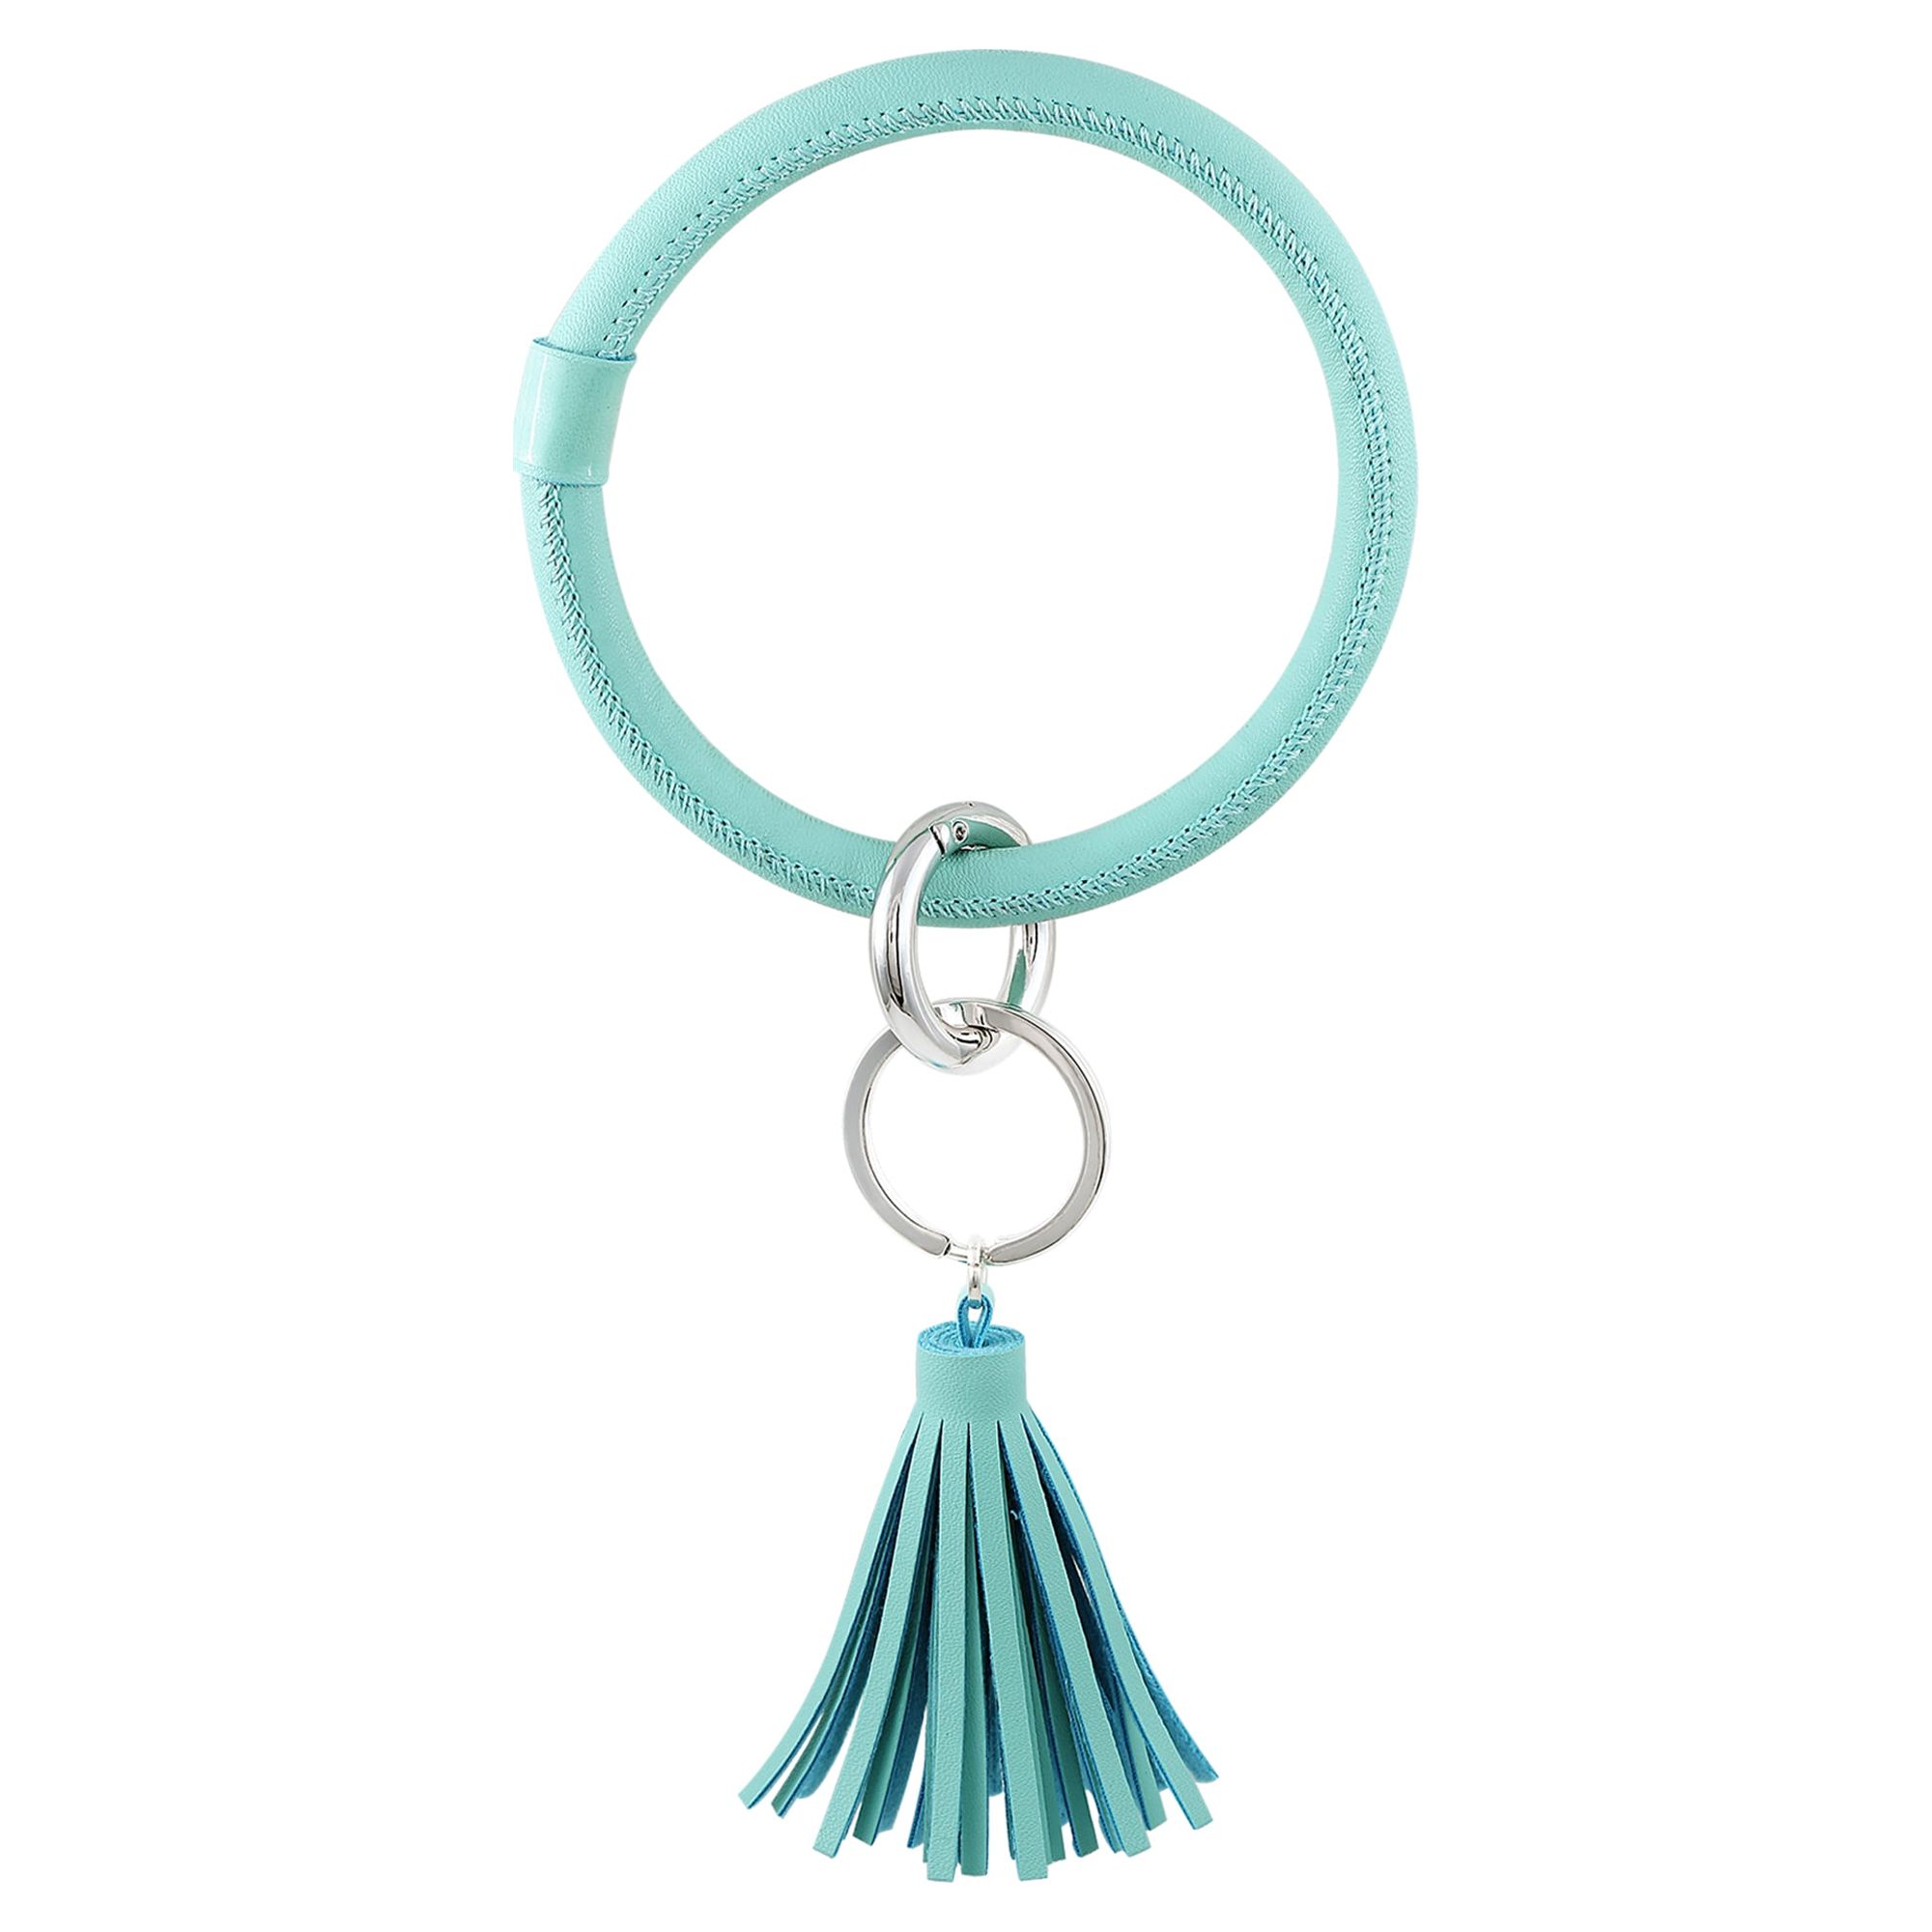 Sensible Solutions Women's Turquoise Faux Leather Tassel Bangle